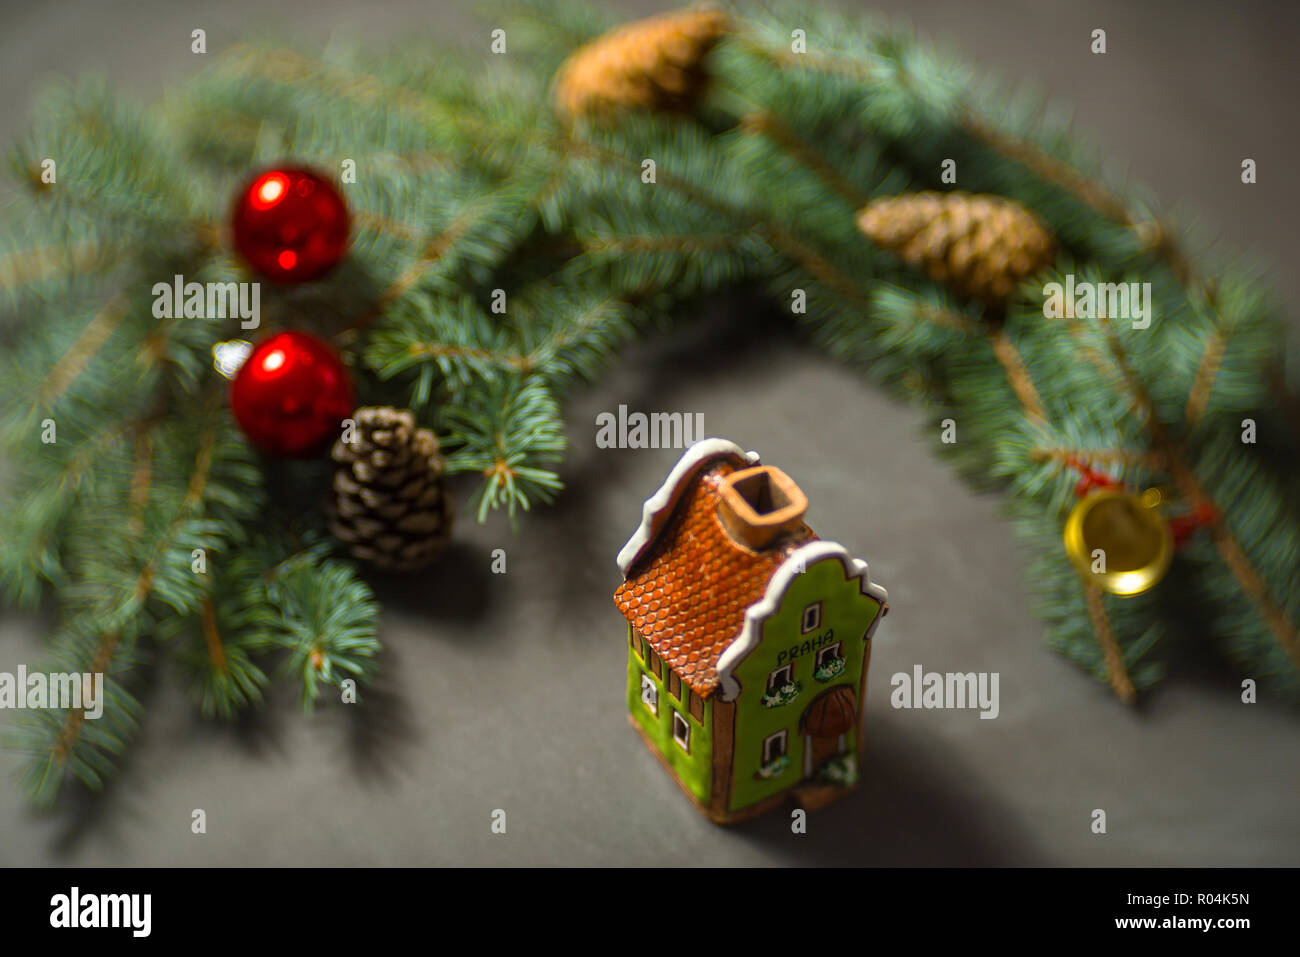 Ceramic green toy house with fir and red globes. Stock Photo